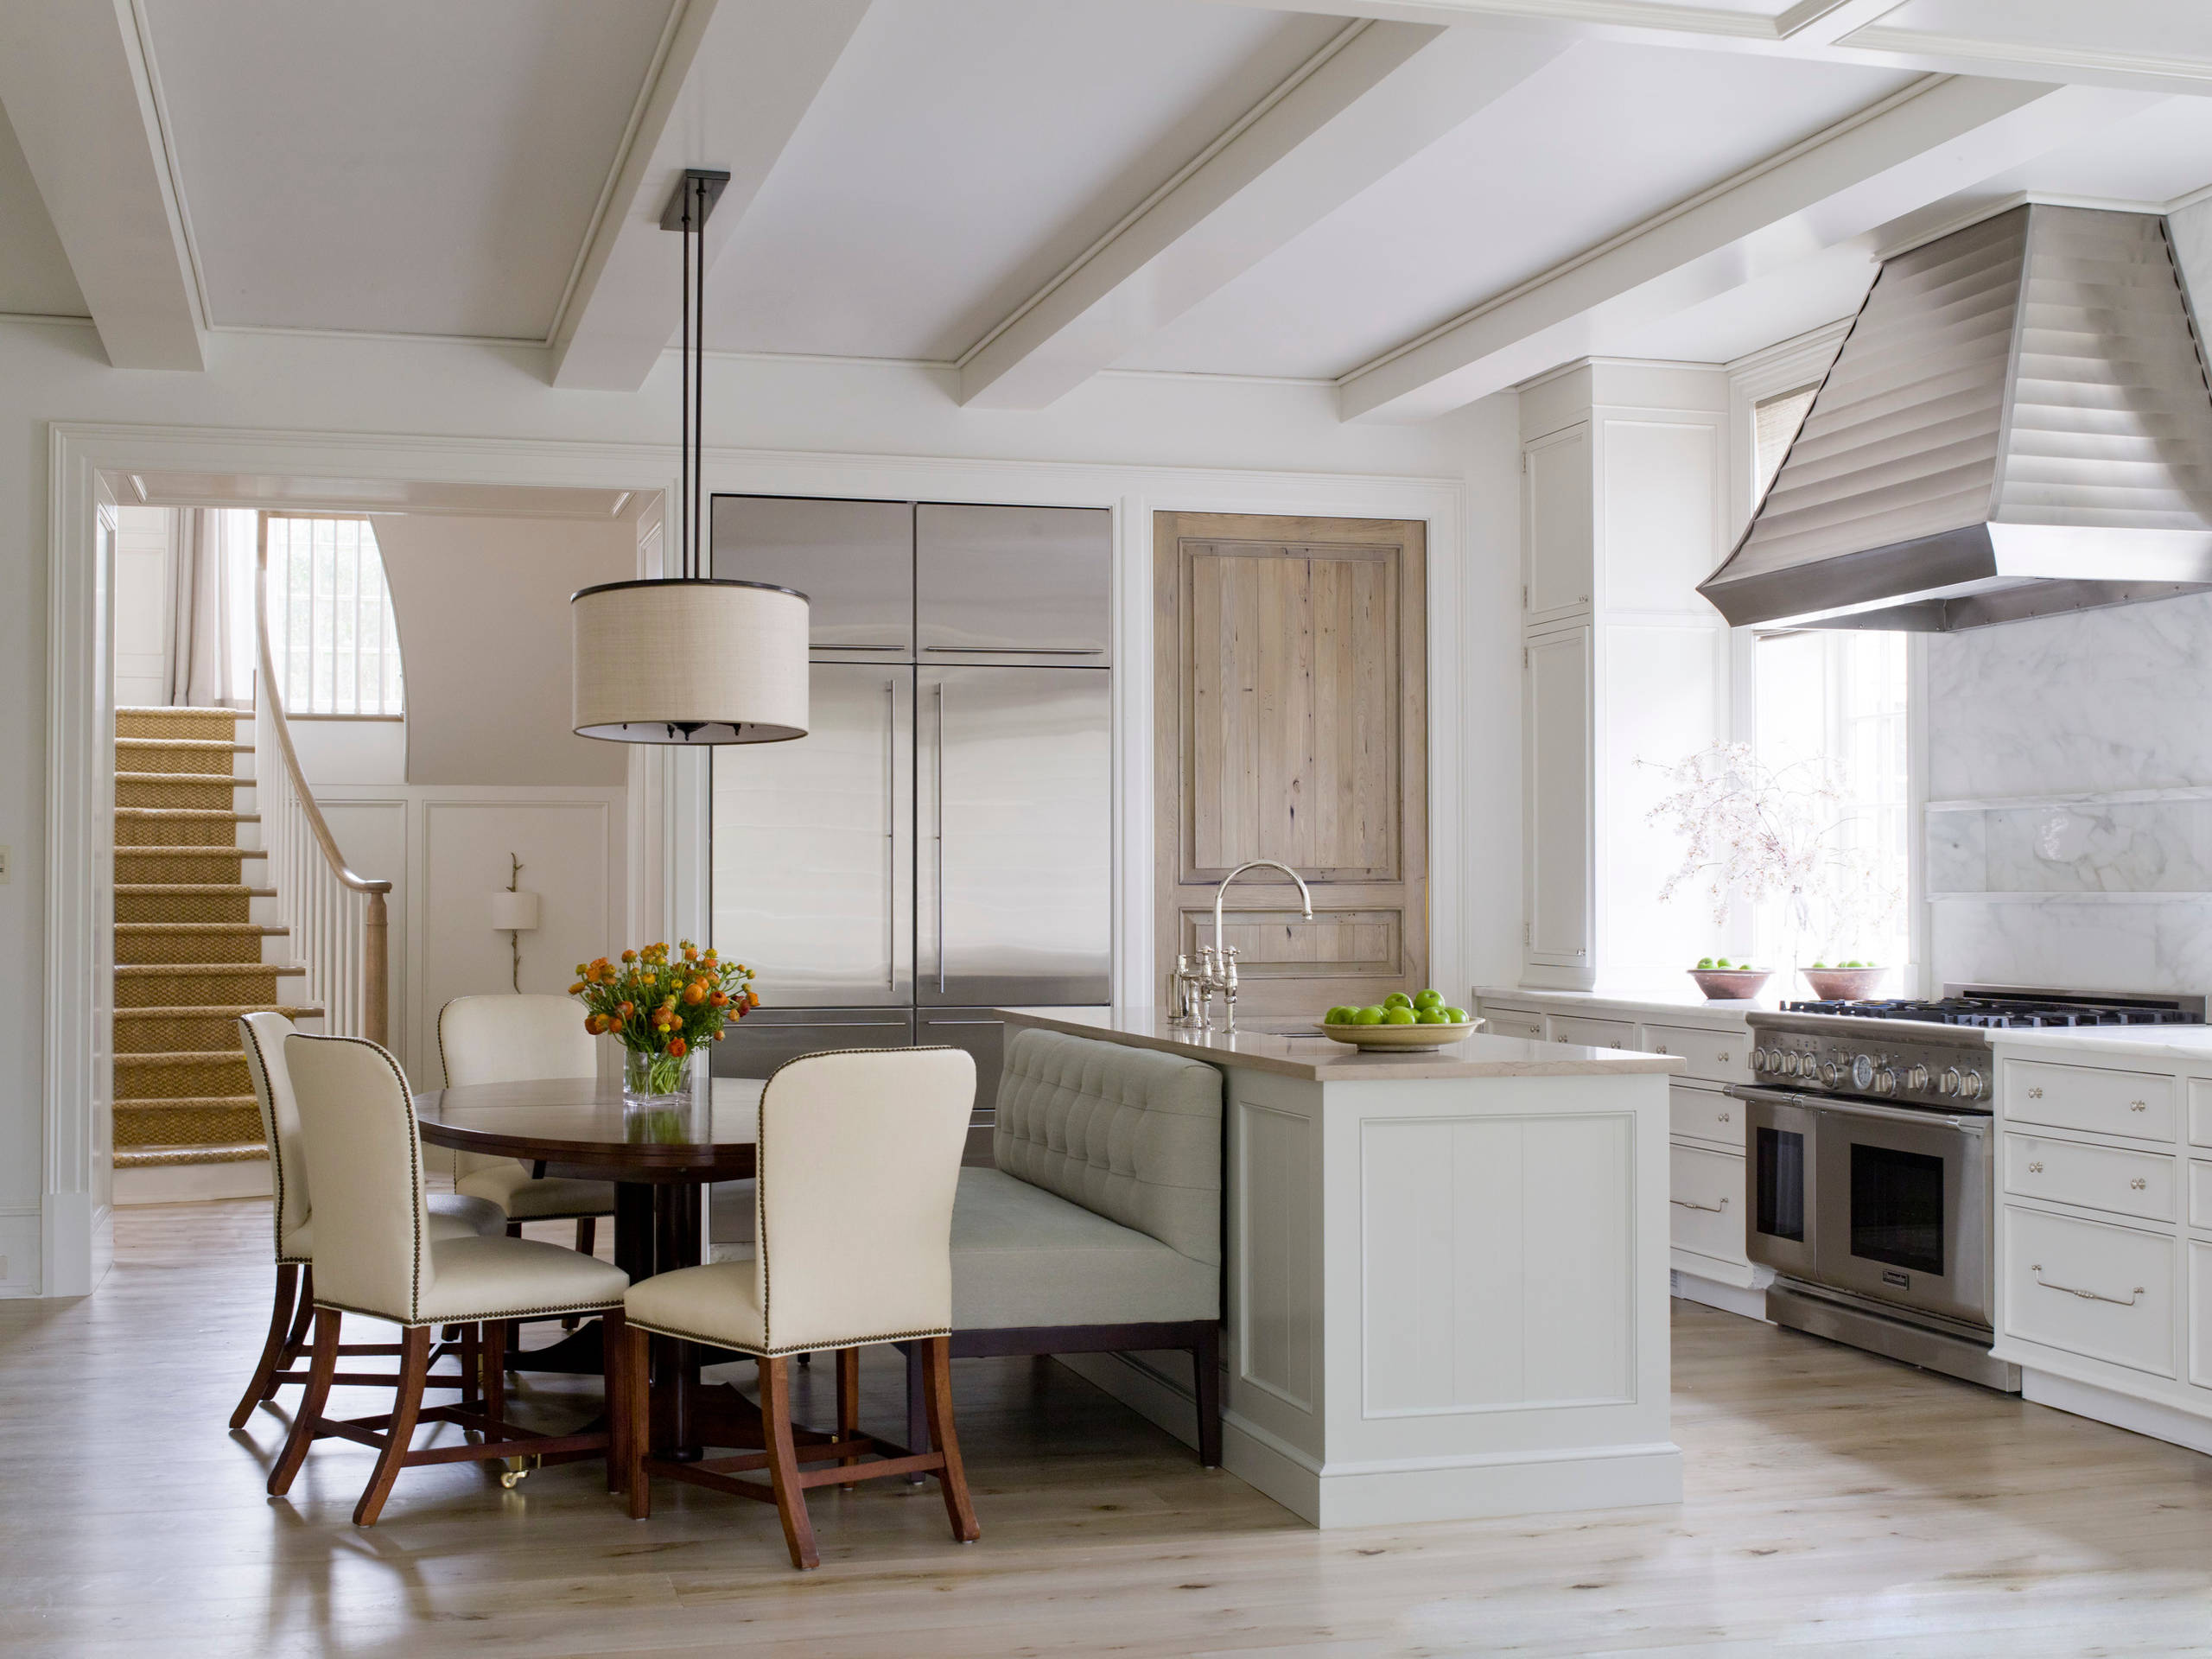 Modern and elegant kitchen featuring a kitchen island connected to a breakfast nook